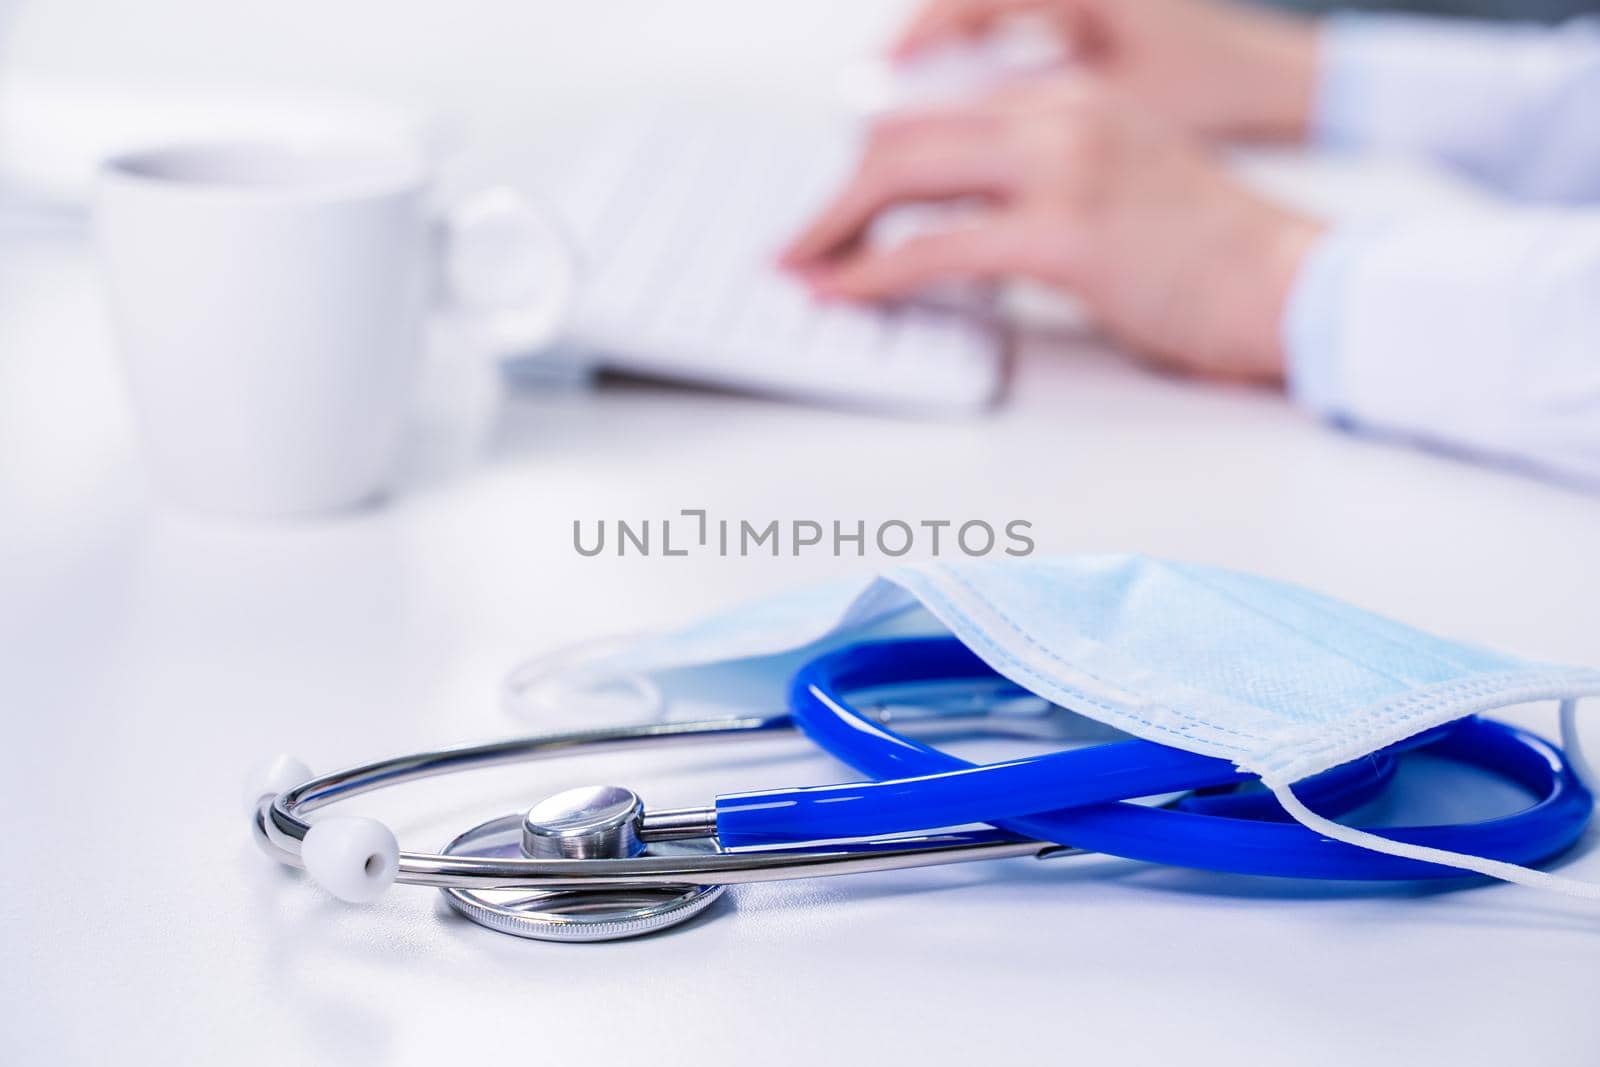 Business concept - Young female doctor woman working at office with computer, typing electronic medical record, white table background, close up, copy space